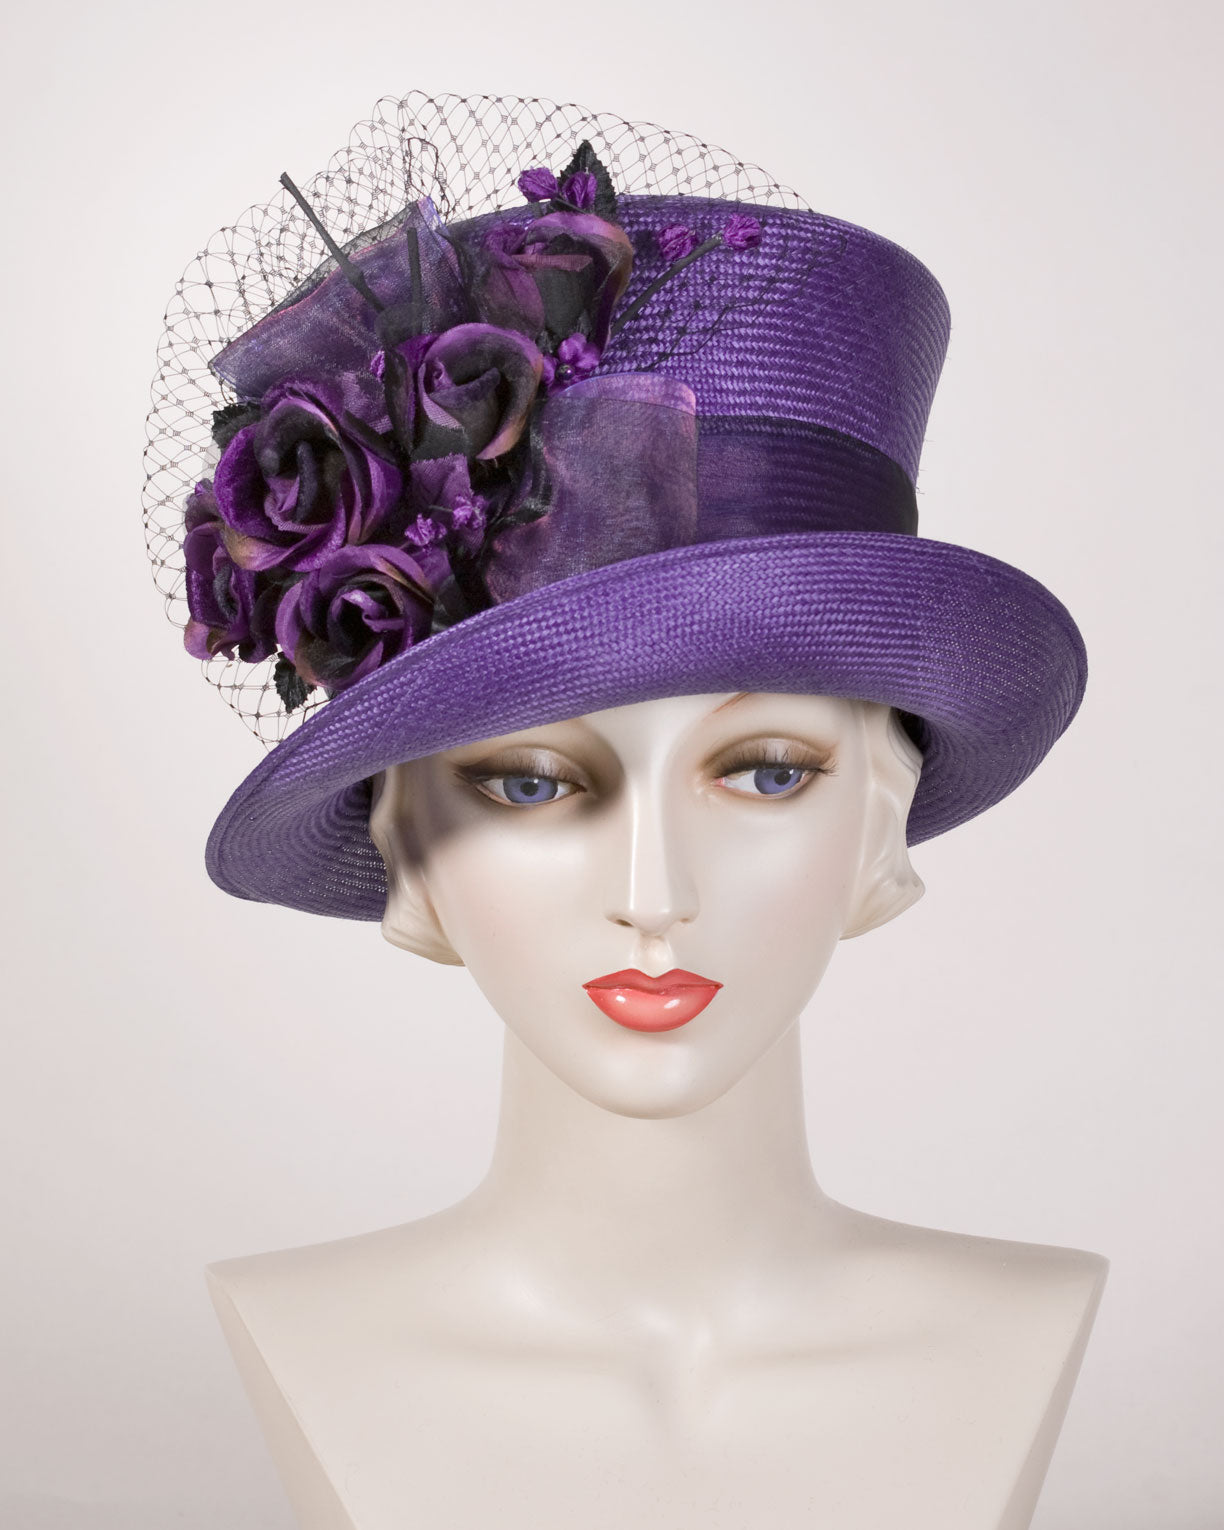 About Louise – Louise Green Millinery